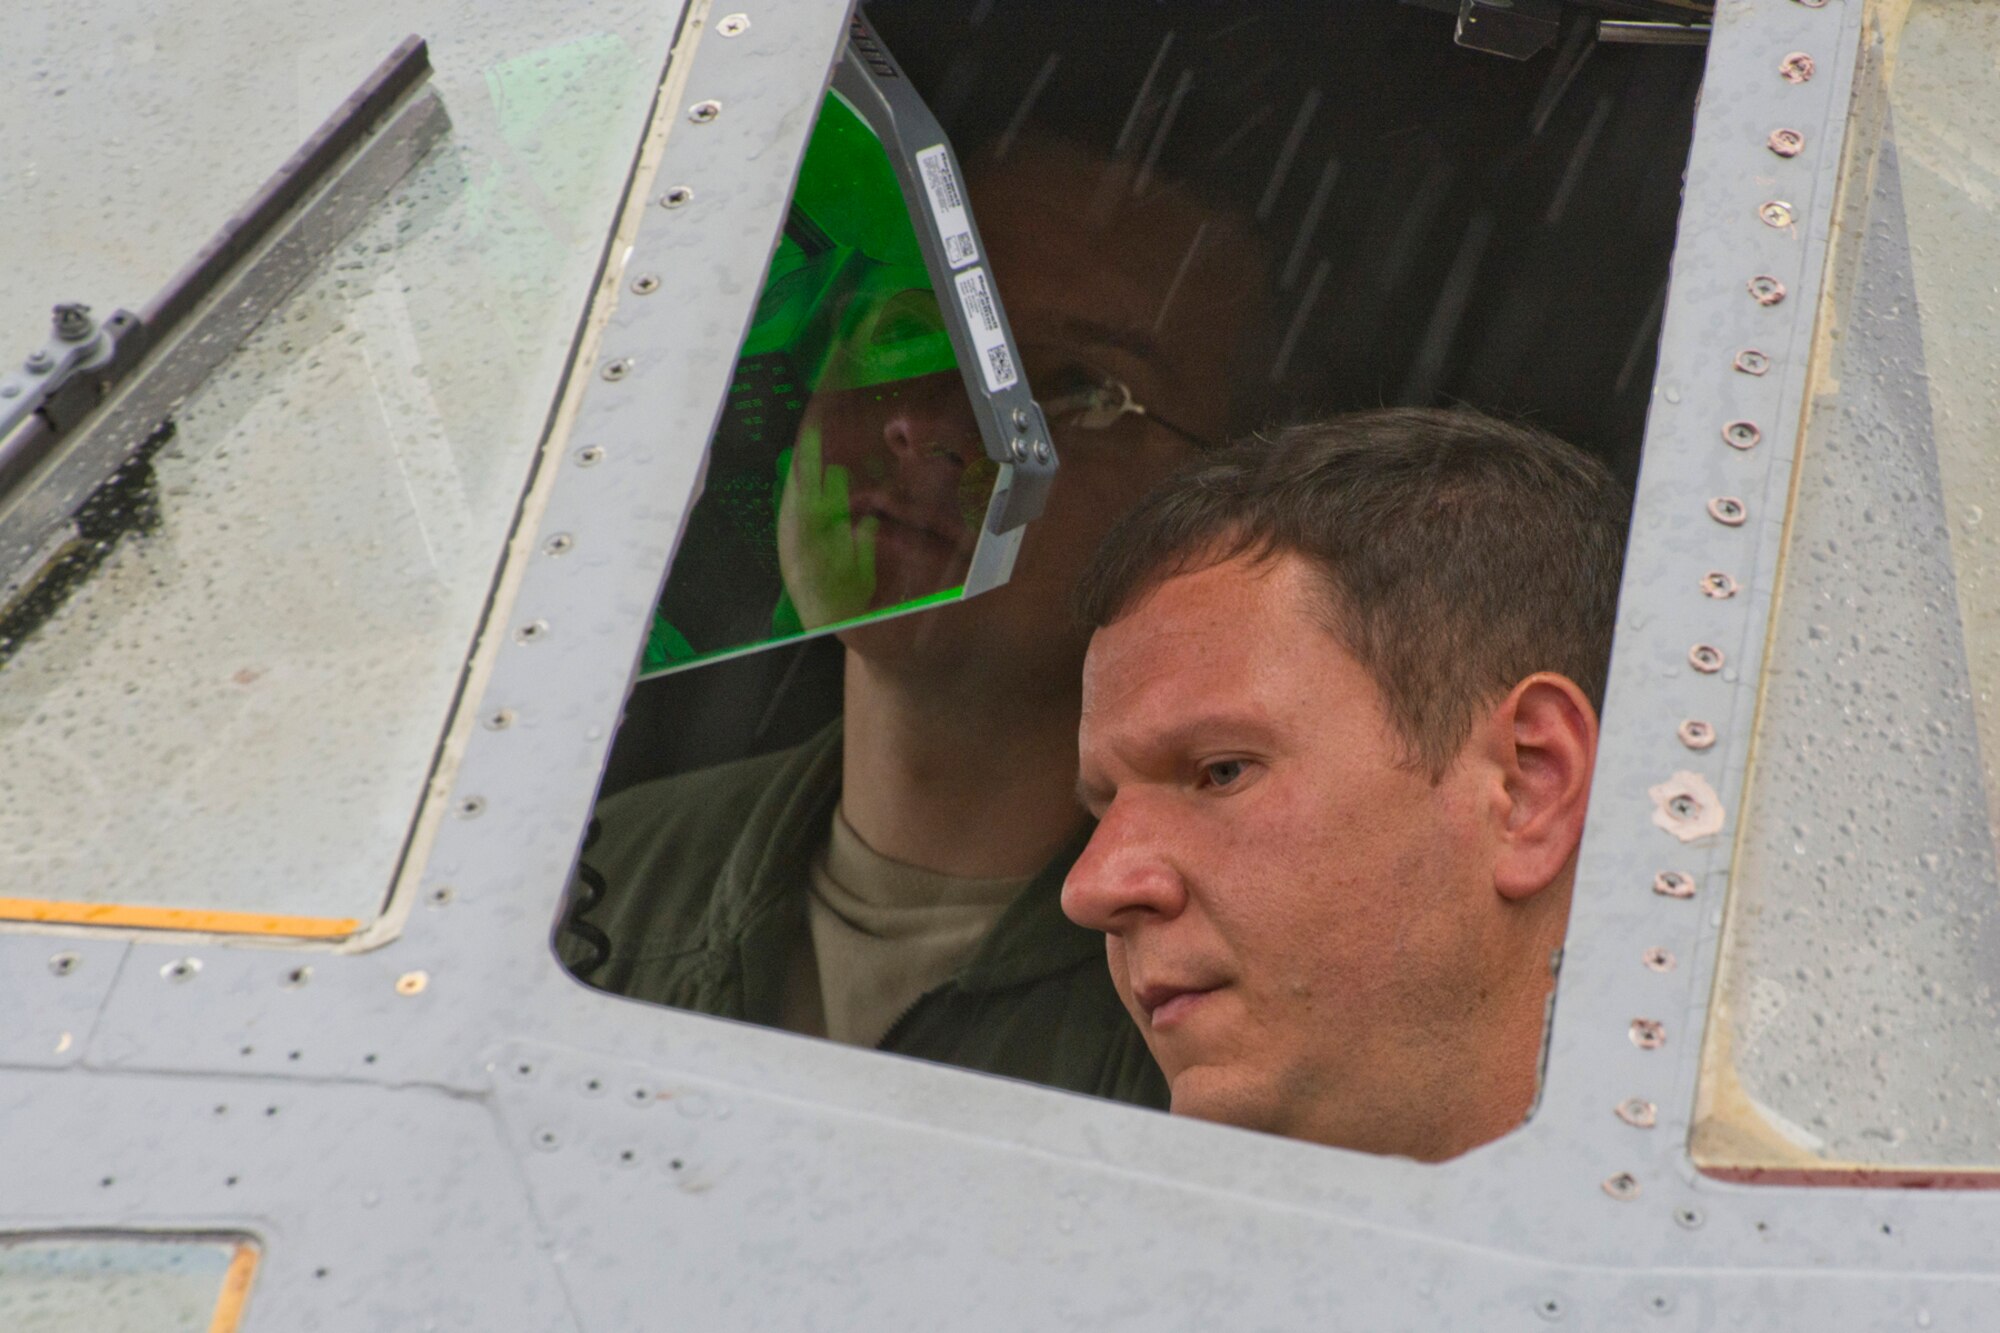 U.S. Air Force Reserve Maj. Jason Furcron, a pilot assigned to the 327th Airlift Squadron, performs preflight checks before taking off from Little Rock Air Force Base, Ark., Aug. 13, 2016. This marks the first two-ship mission during a Unit Assembly Training weekend since the 913th Airlift Group’s transition from the “H” to the “J” model. (U.S. Air Force photo by Master Sgt. Jeff Walston)